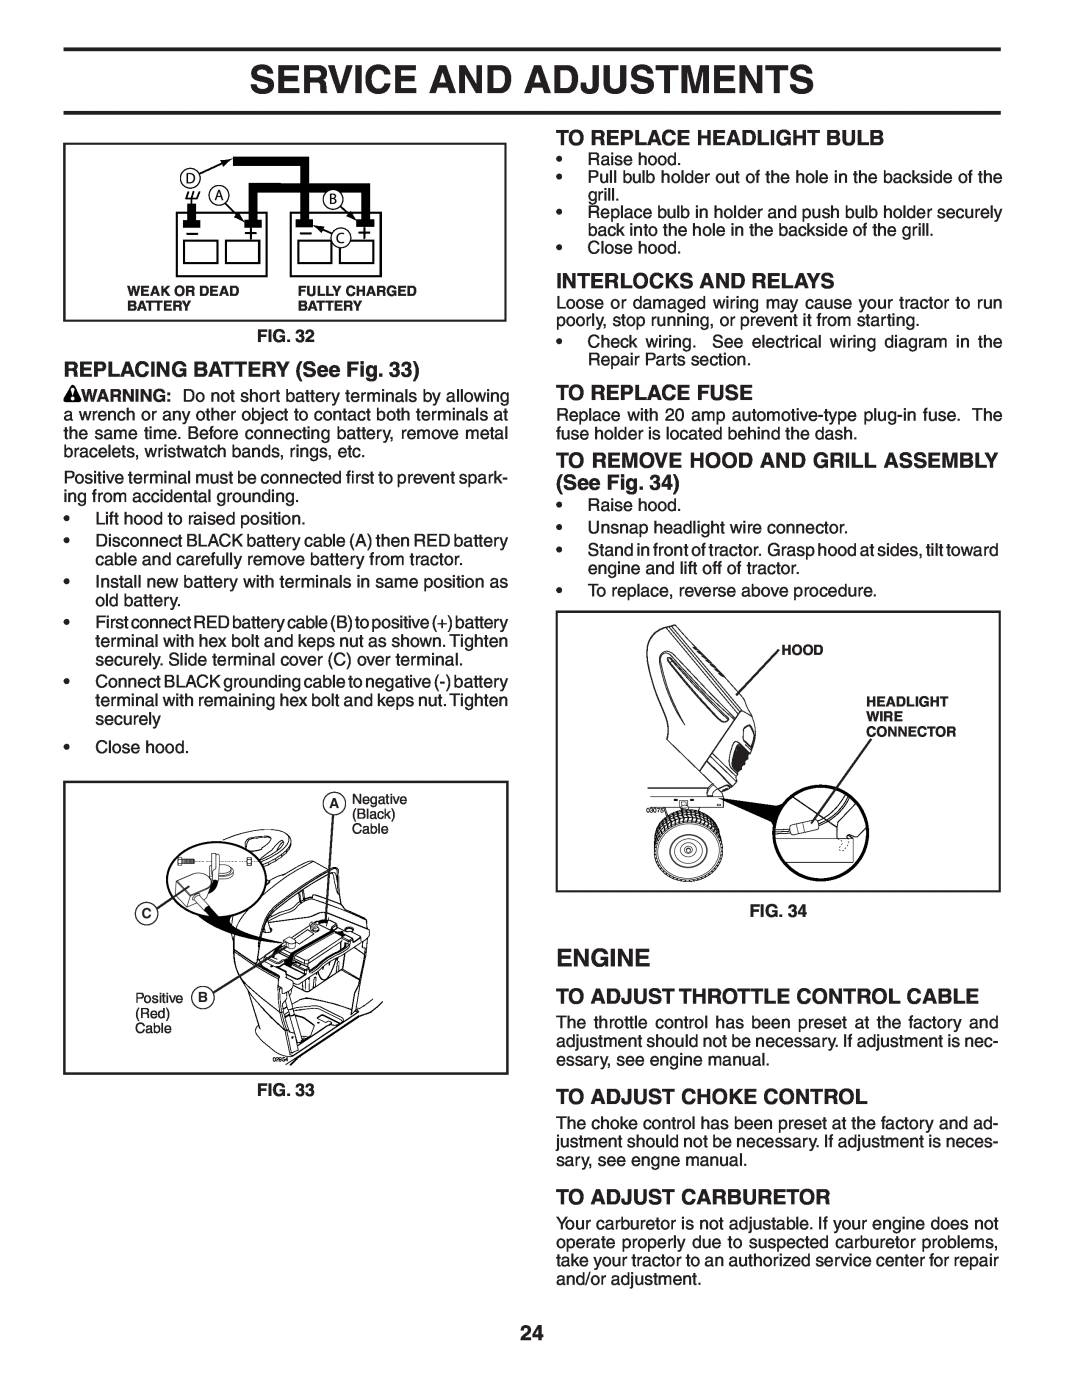 Poulan 404402 manual REPLACING BATTERY See Fig, To Replace Headlight Bulb, Interlocks And Relays, To Replace Fuse, Engine 